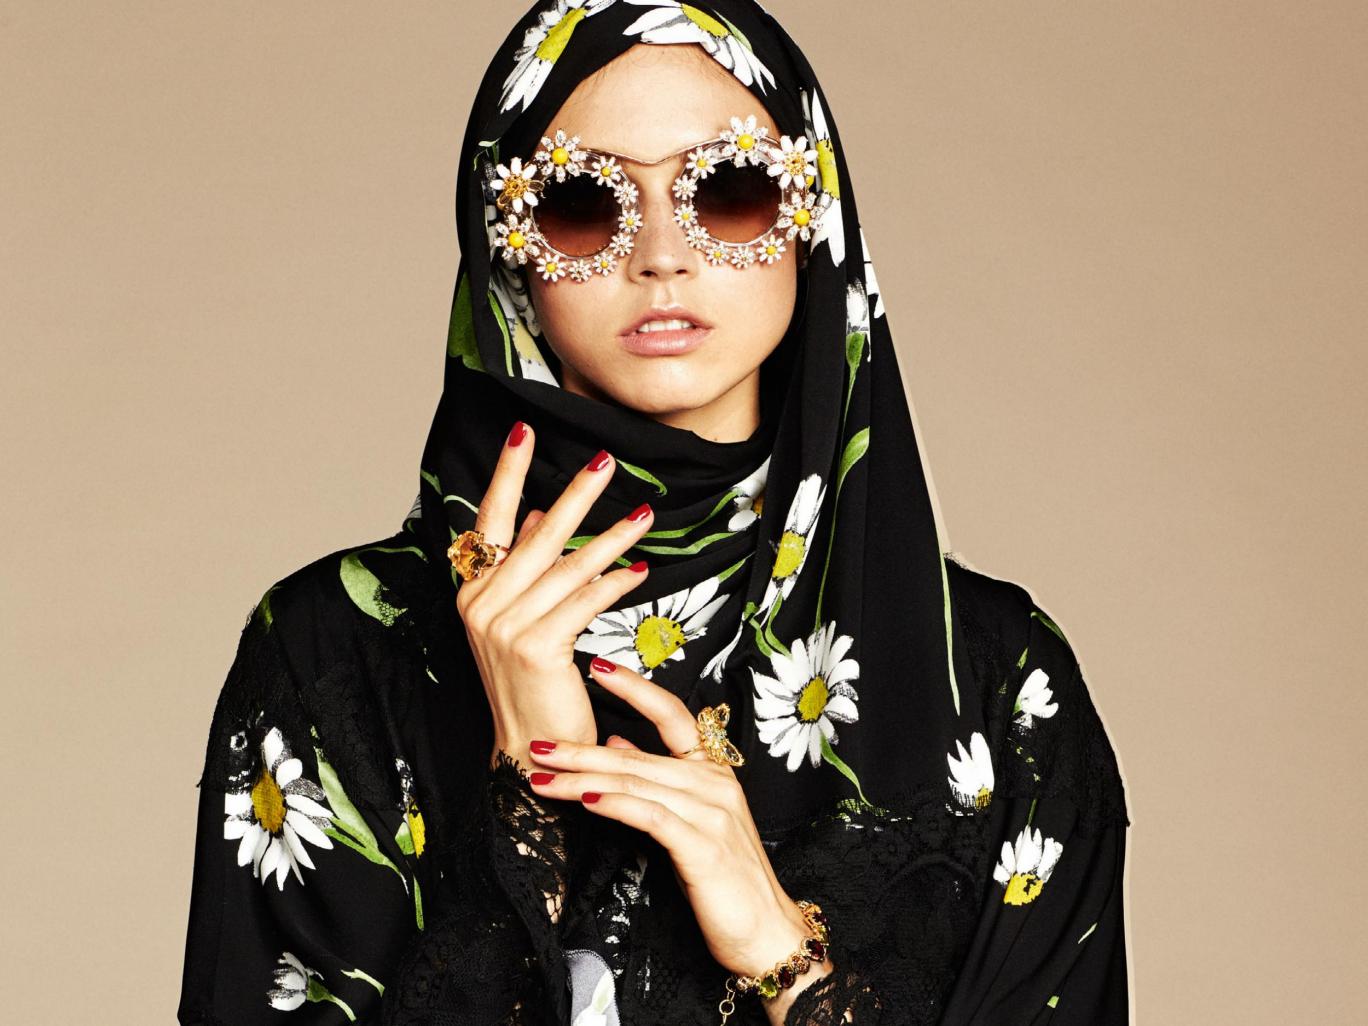 Manhattan Exhibits Lively, Modest Muslim Fashion - About Islam